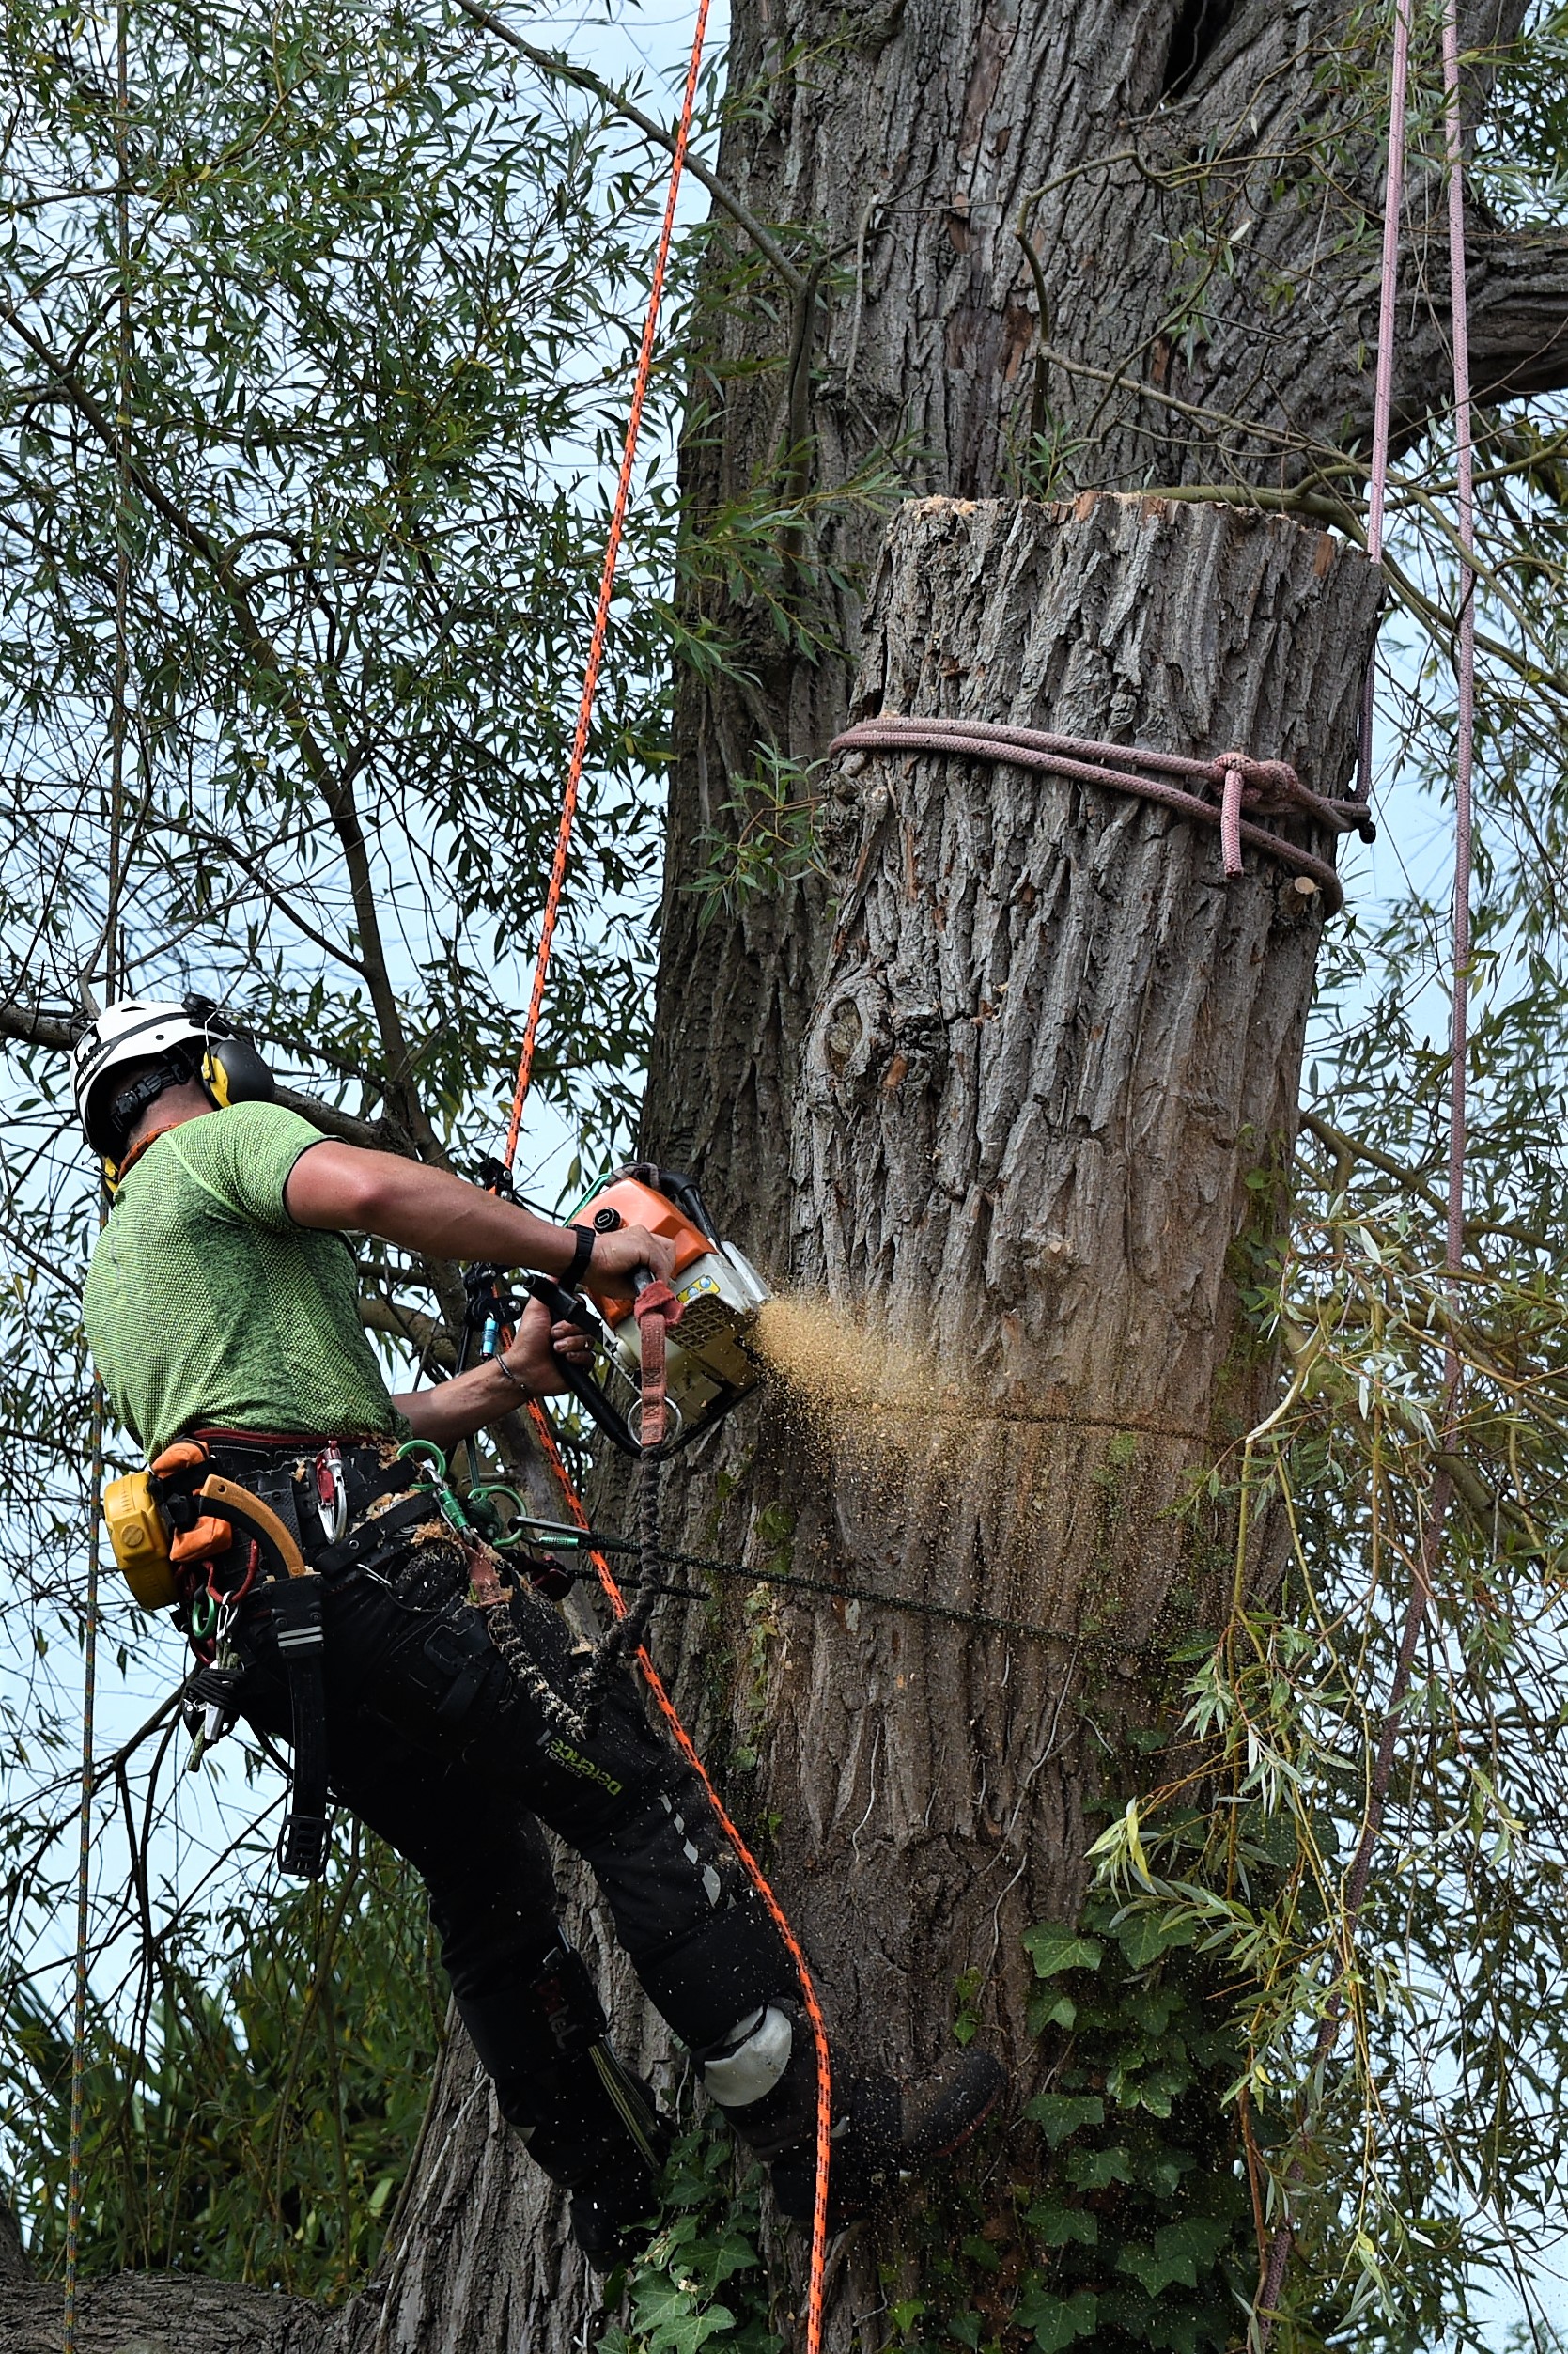 dismantling a large willow tree, dismantling, tree dismantle, willow tree, Weymouth tree surgeon, Weymouth tree surgeons, Dorset tree surgeons, Dorset tree surgery, Dorchester tree surgery, tree surgery Dorset, tree surgery Dorchester, tree surgery Weymouth, arborists, arboriculture